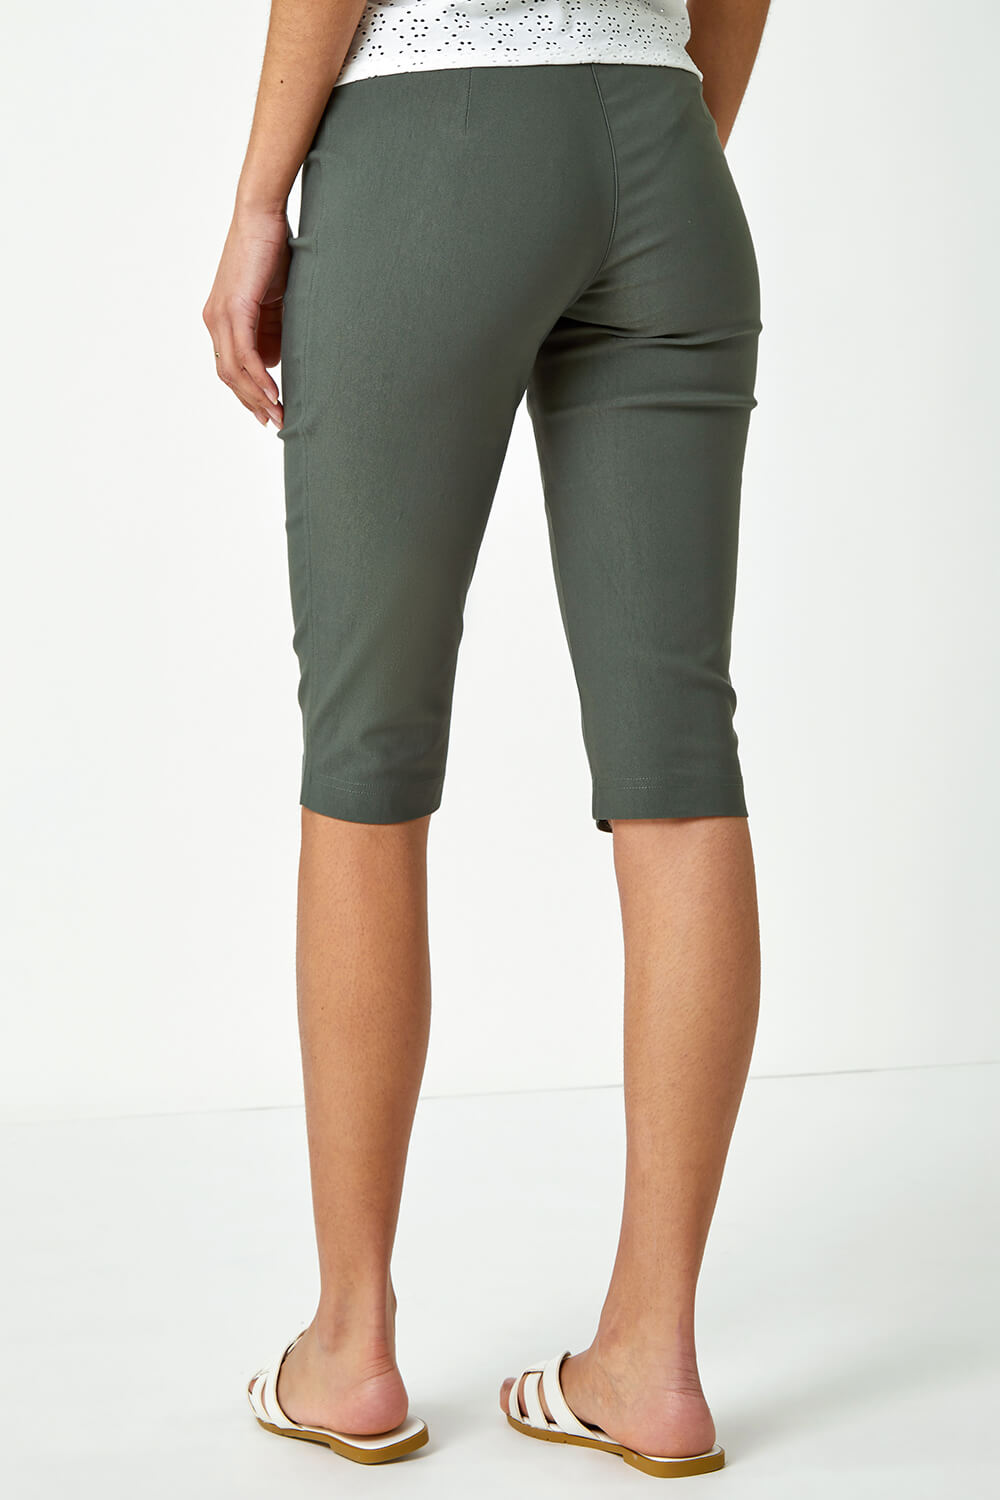 Forest  Knee Length Stretch Shorts, Image 3 of 6